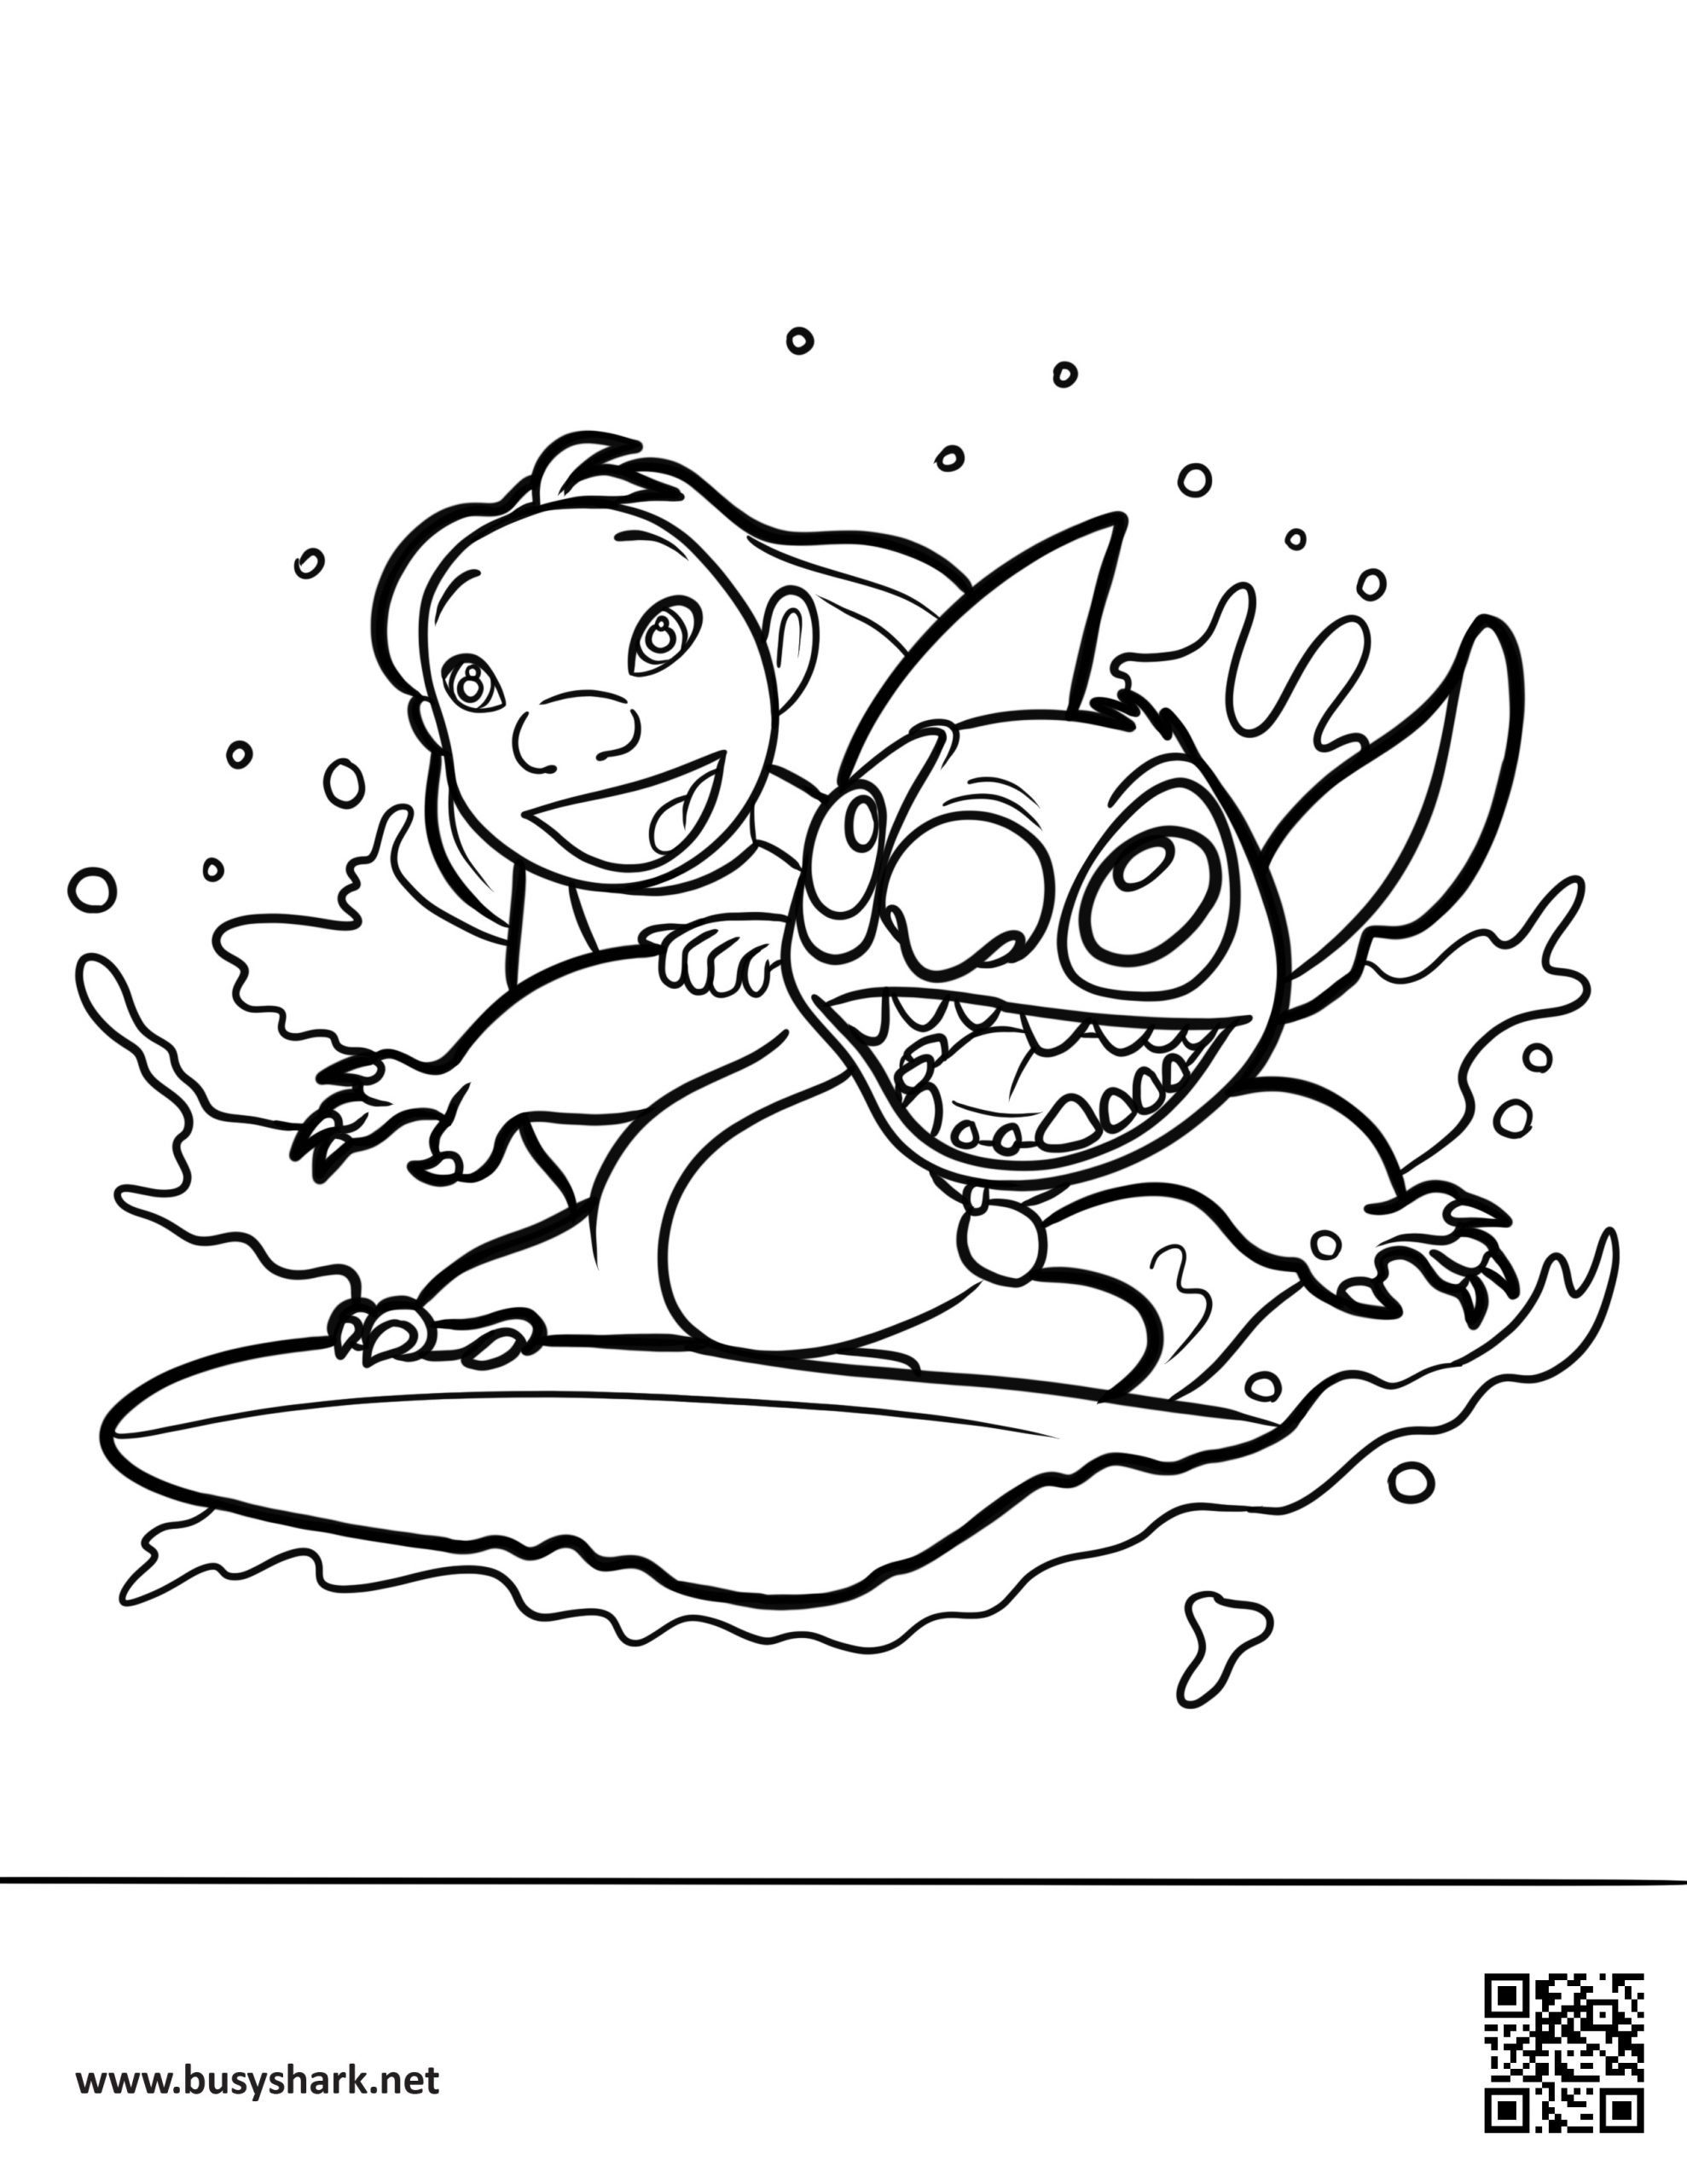 Lilo and stitch coloring page free printable